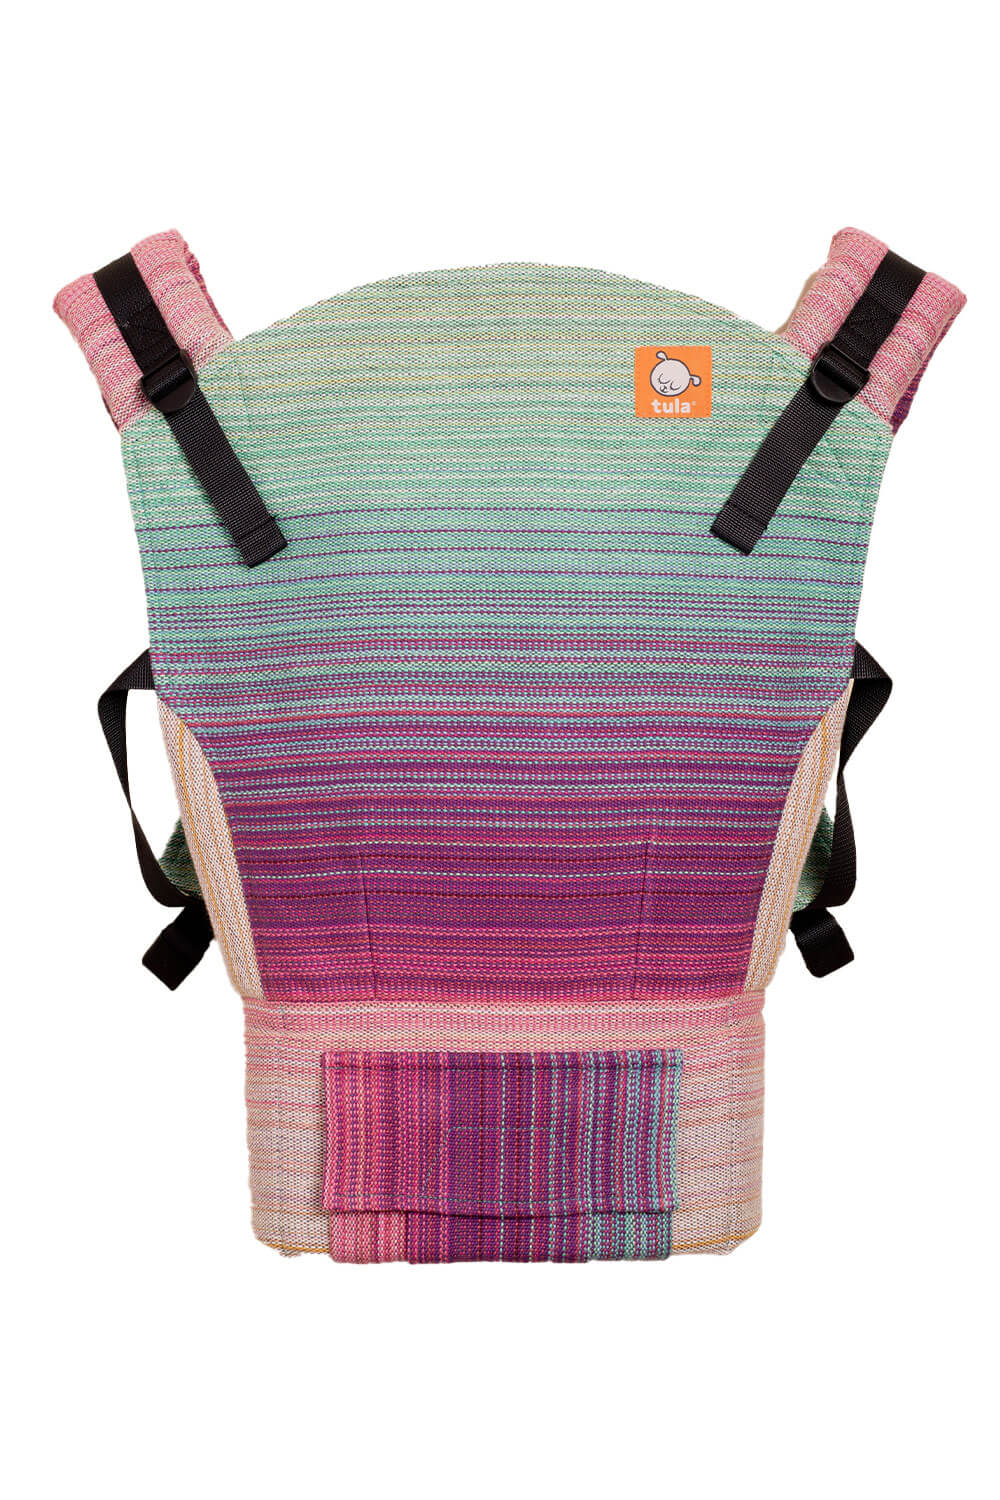 Stewed Rhubarb Sparkle, Grind, Repeat (charcoal weft) - Tula Signature Baby Carrier